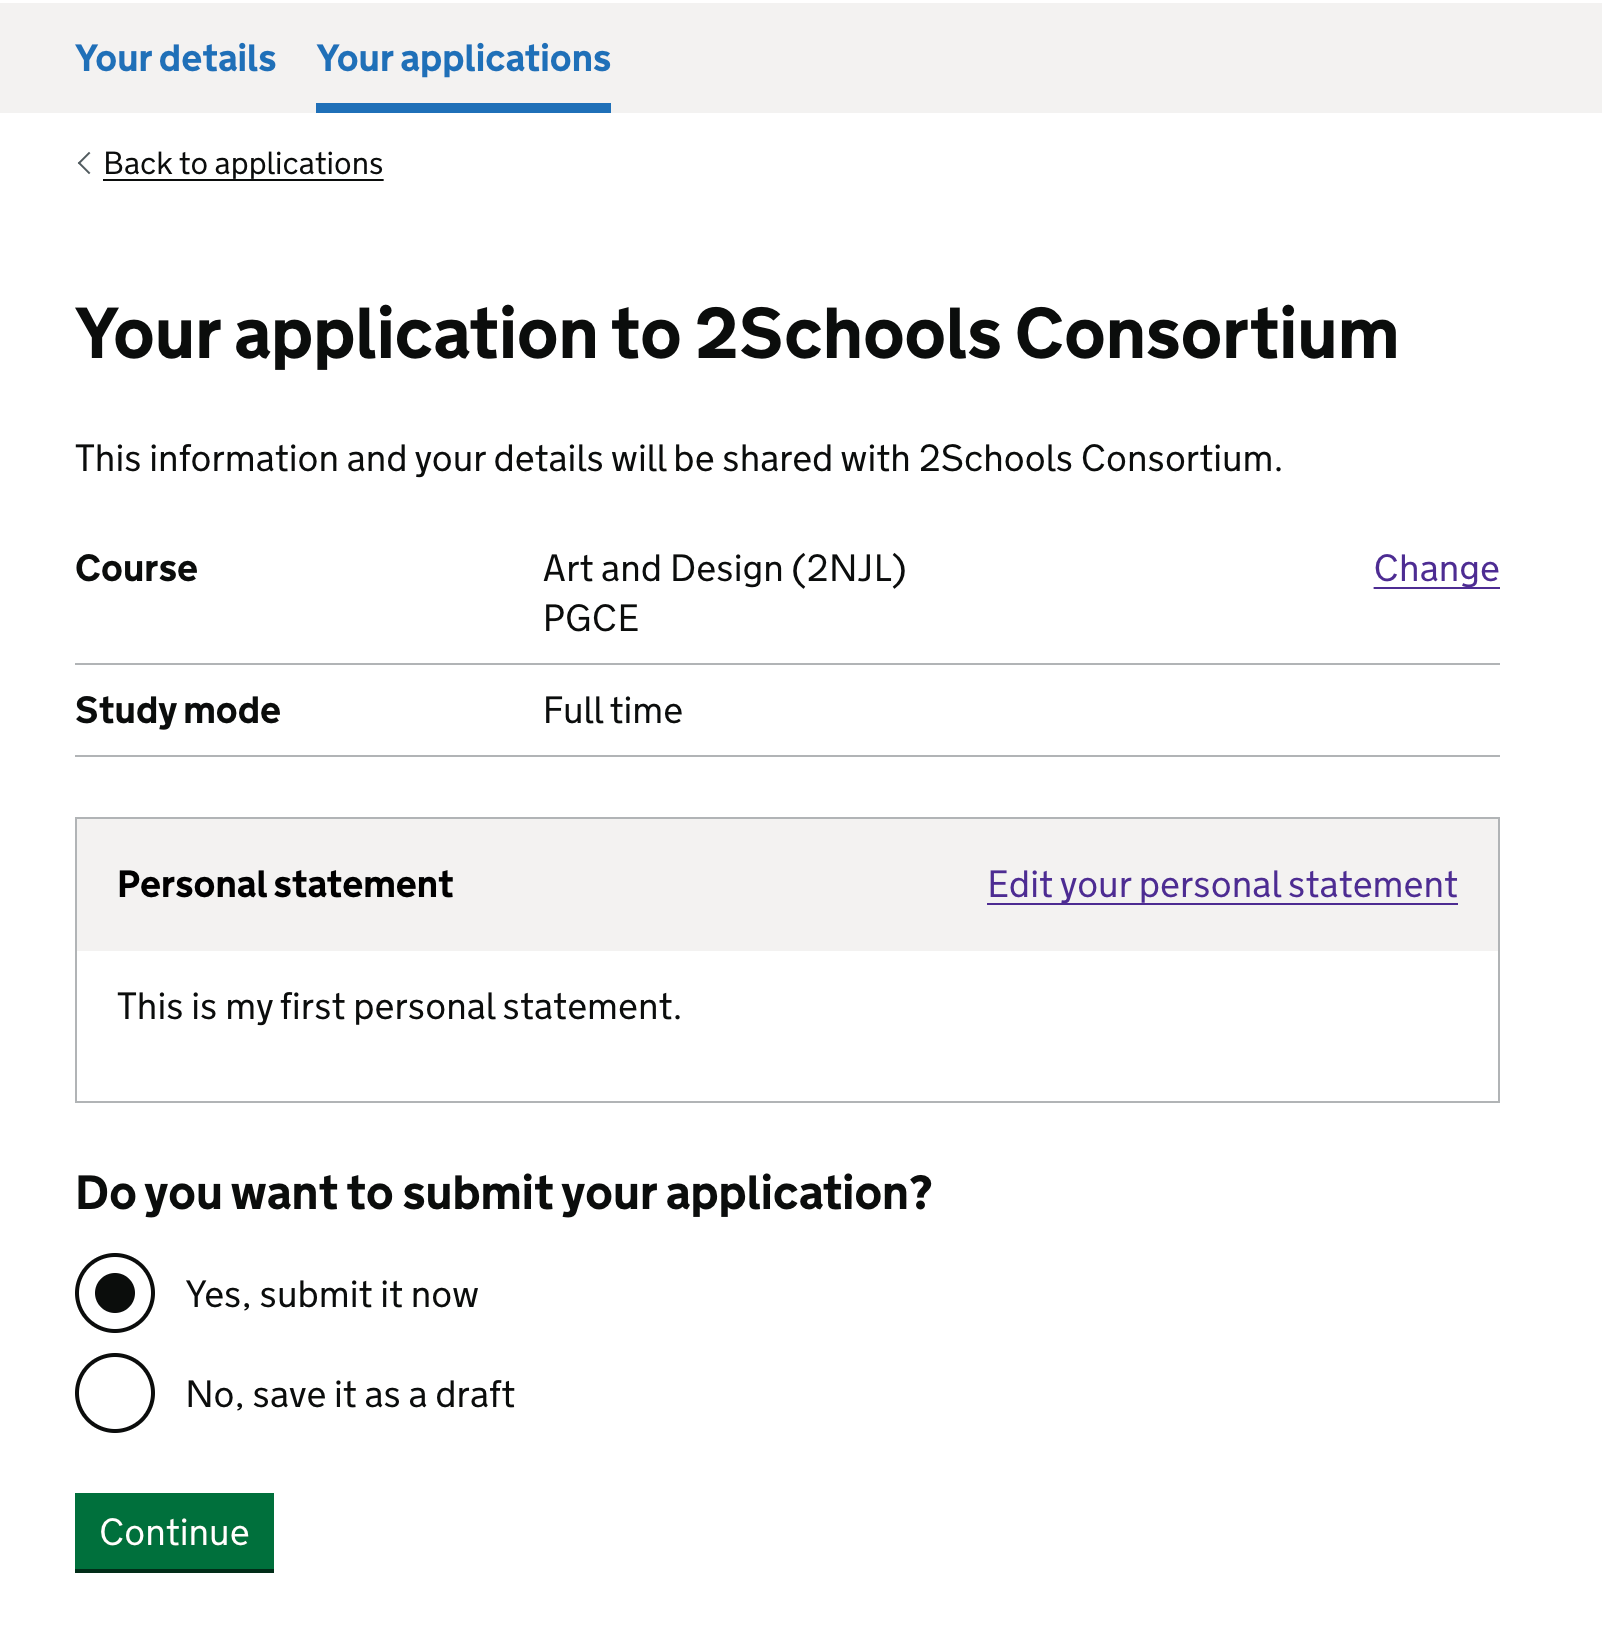 Screenshot showing the review page where a candidate can check the training provider, course and personal statement before submitting their first application.